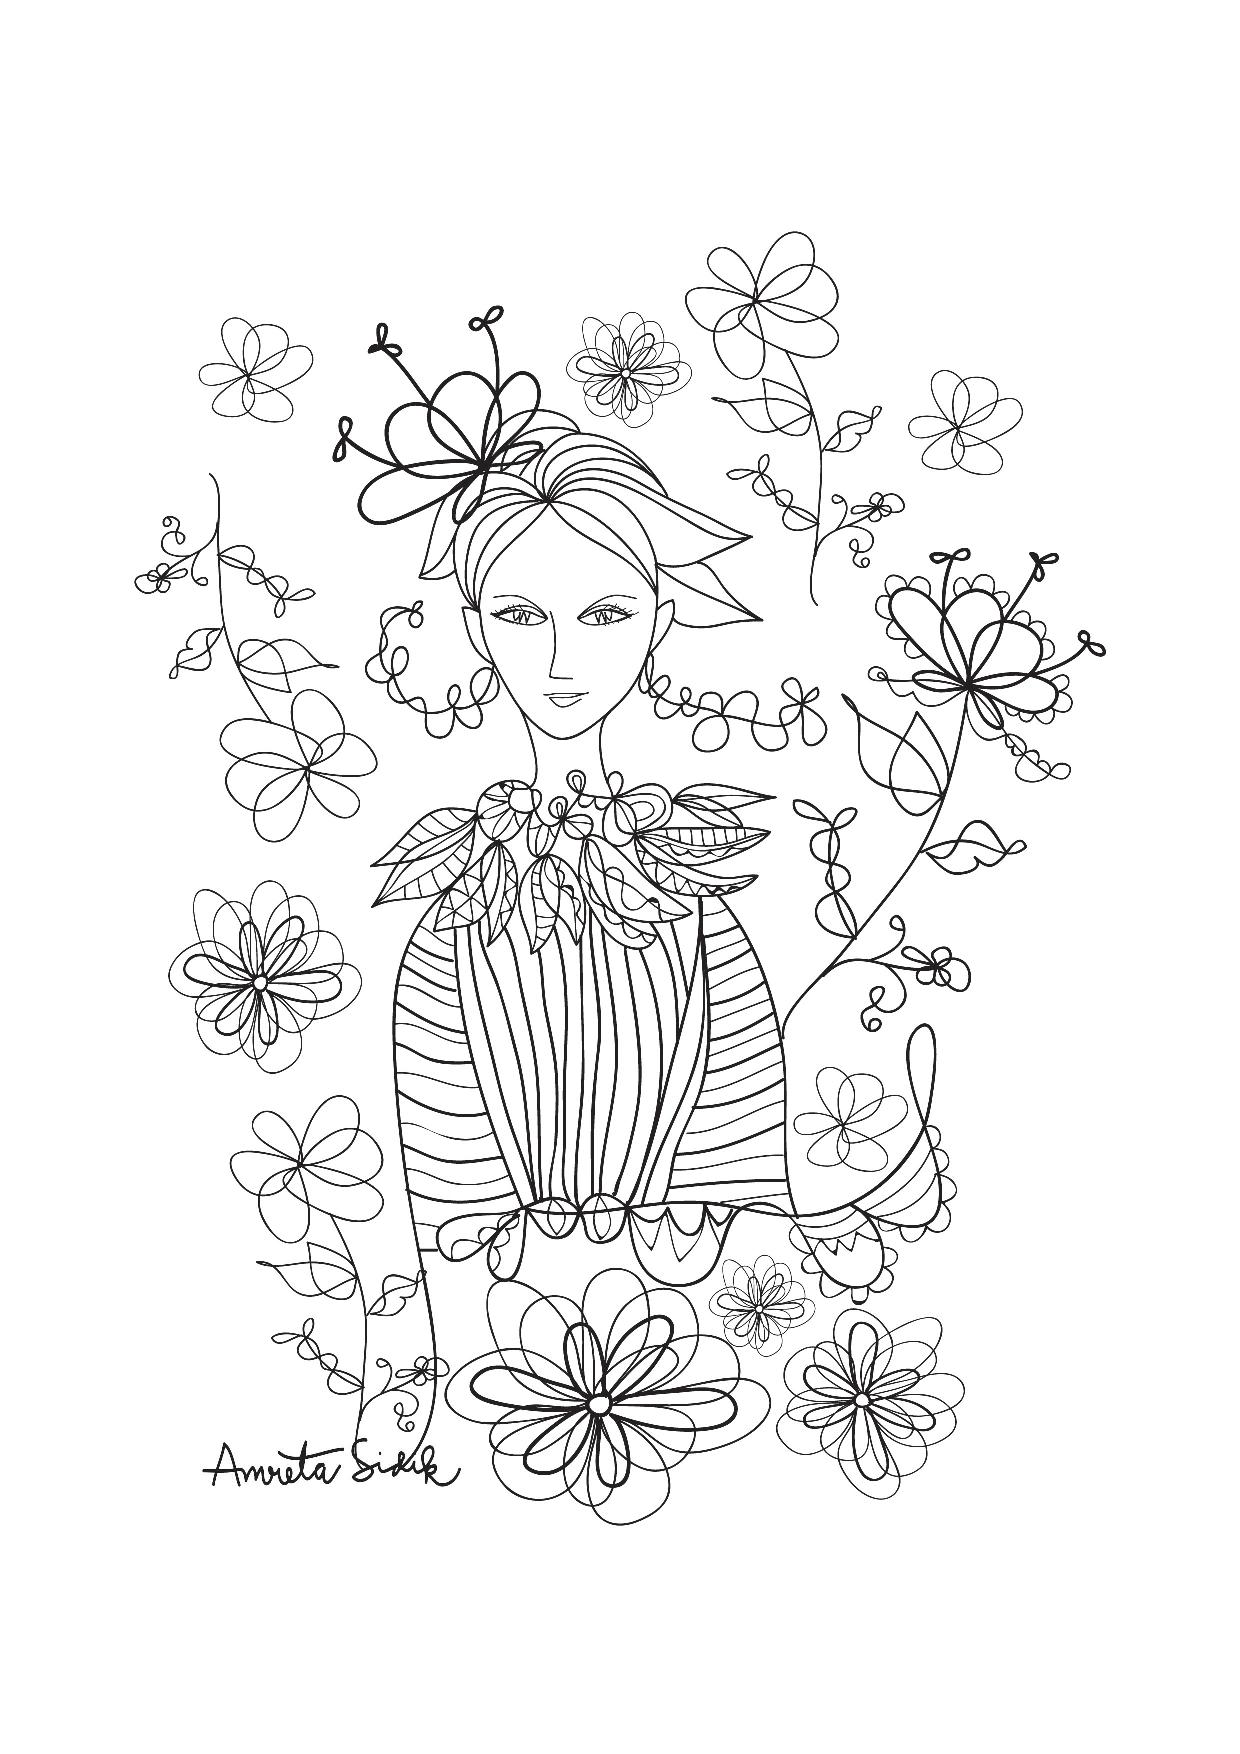 https://www.justcolor.net/wp-content/uploads/sites/1/nggallery/anti-stress/coloring-adult-flowers-girl-2.jpg